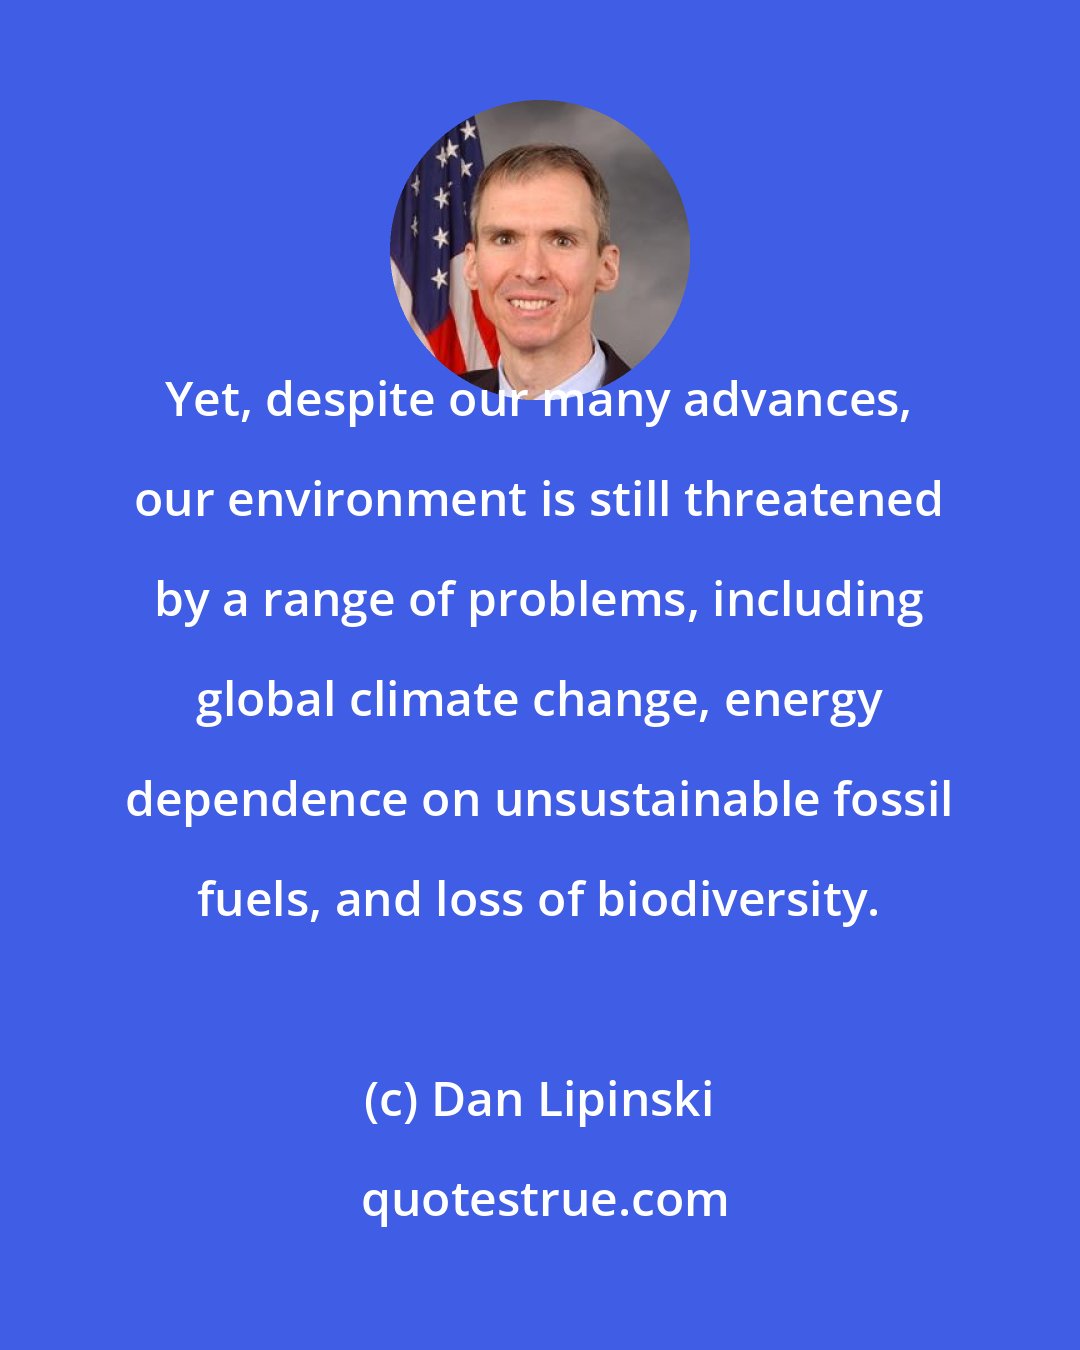 Dan Lipinski: Yet, despite our many advances, our environment is still threatened by a range of problems, including global climate change, energy dependence on unsustainable fossil fuels, and loss of biodiversity.